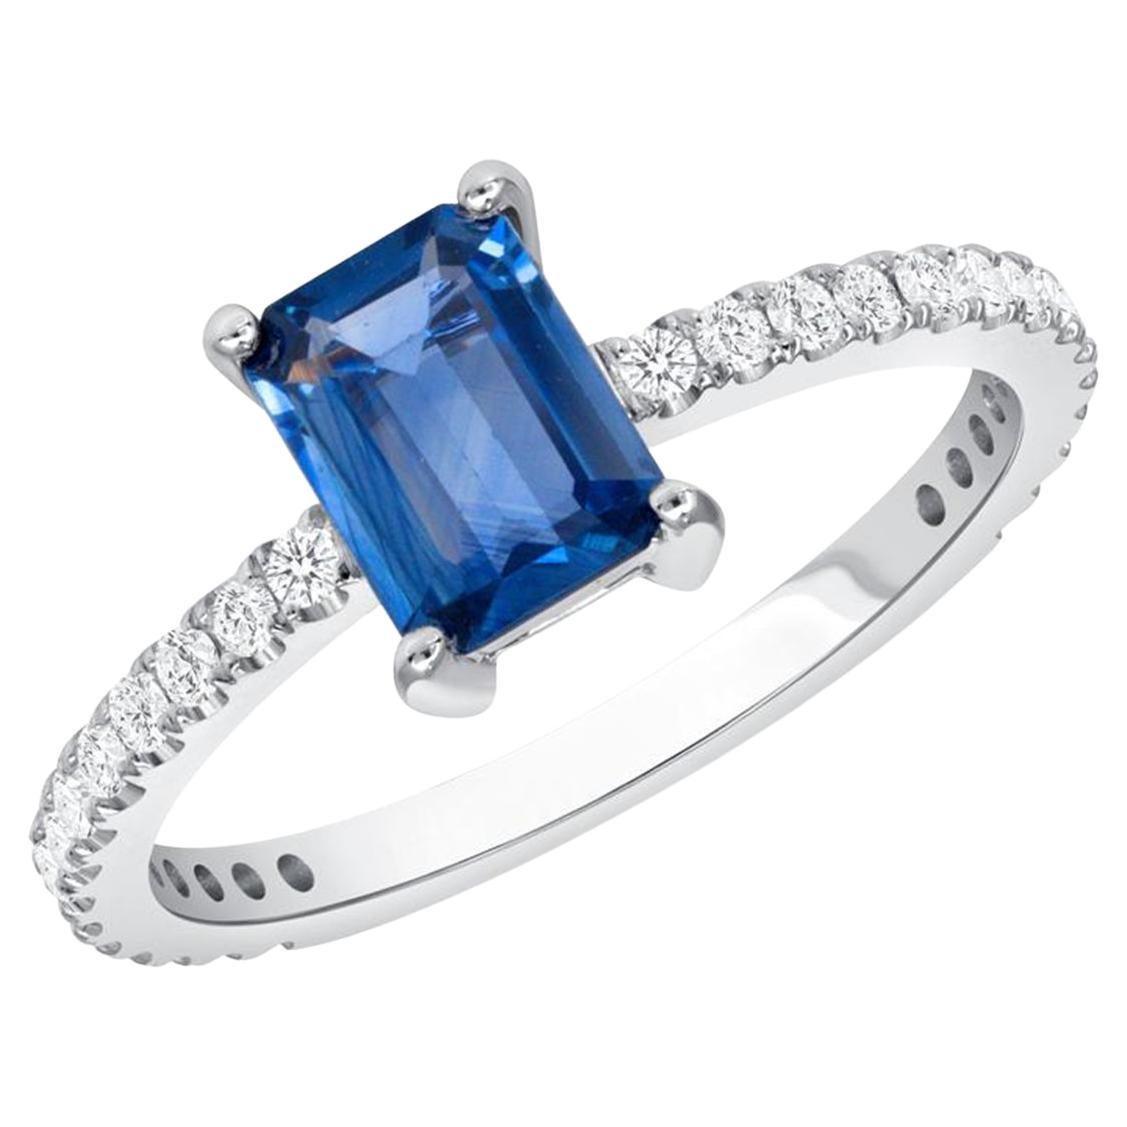 1.05 Ct Sapphire & 0.26 Ct Diamonds in 14K White Gold Engagement Ring